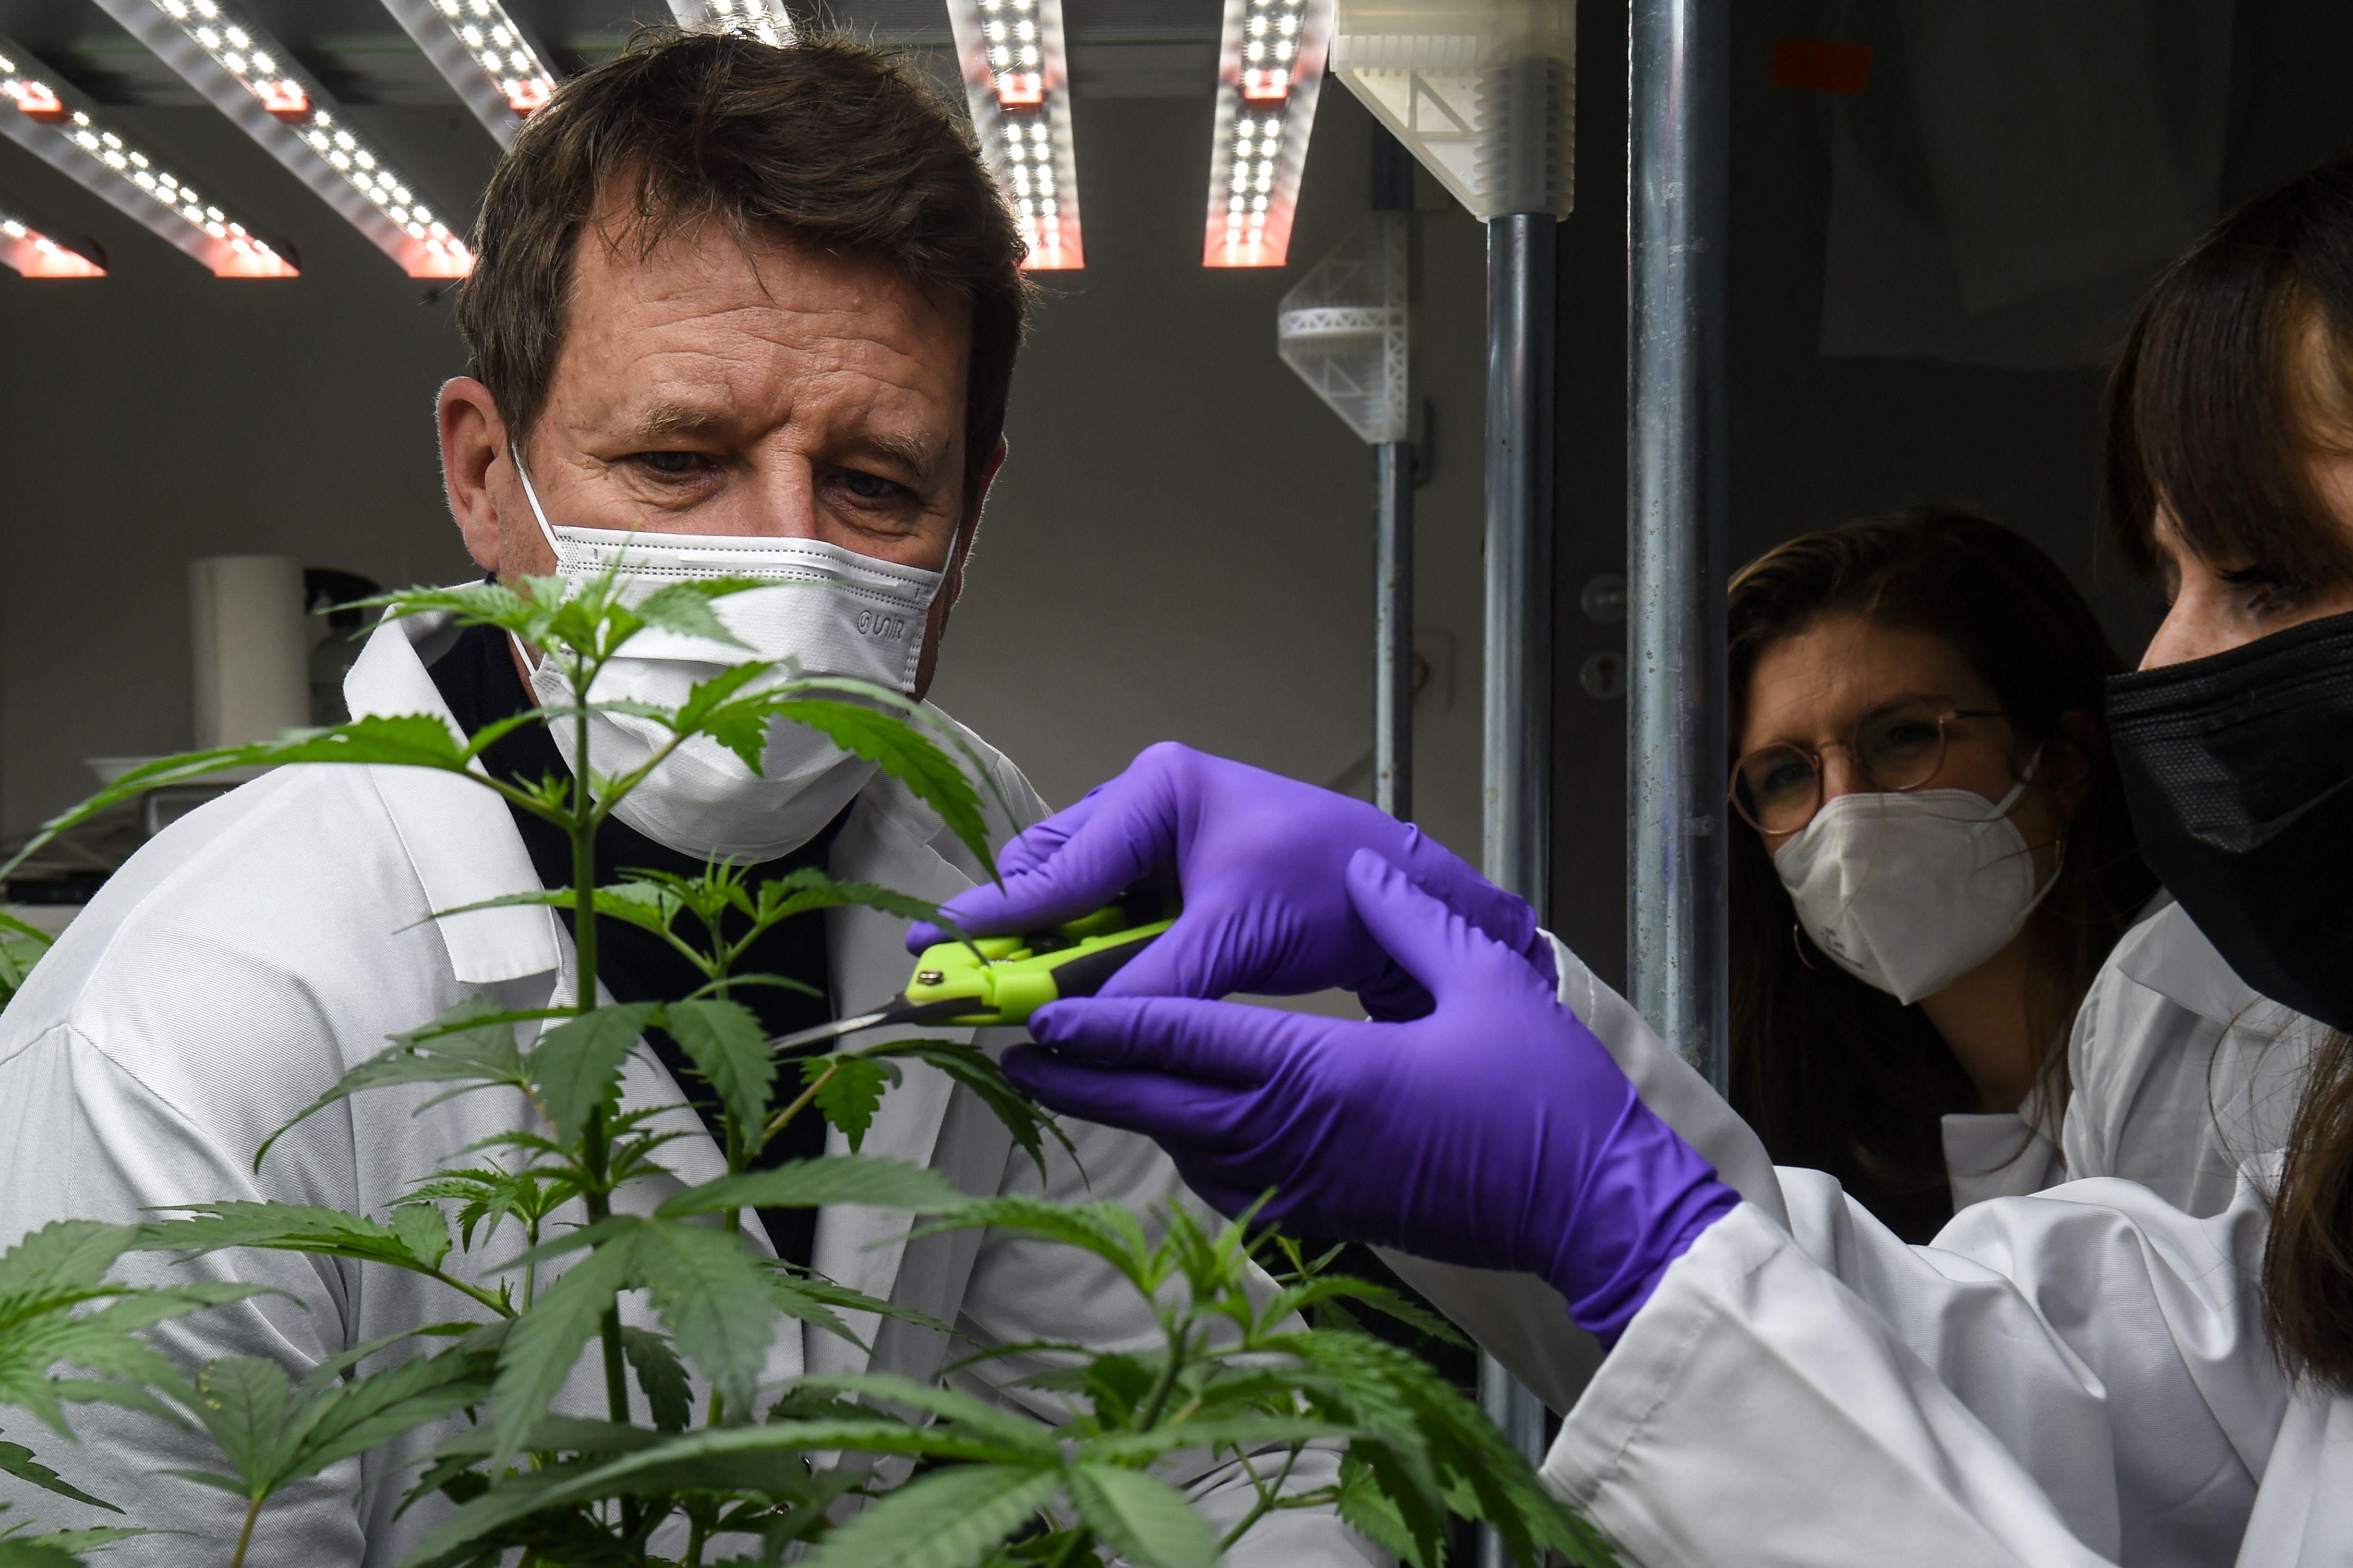 Scientists in lab studying a cannabis plant